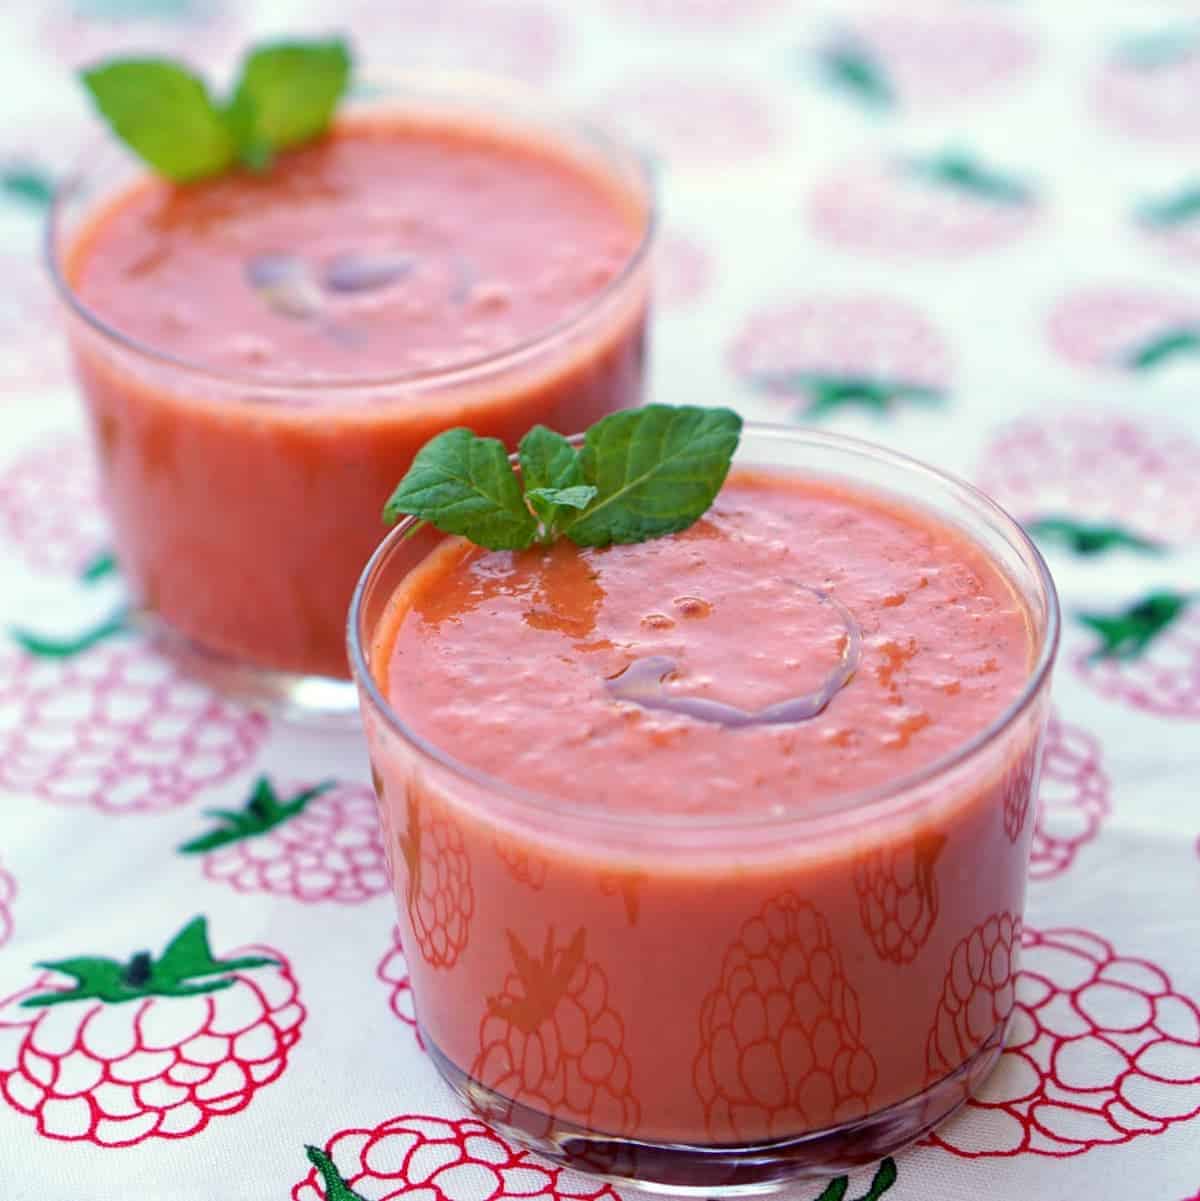 Two clear glasses of watermelon gazpacho garnished with mint.